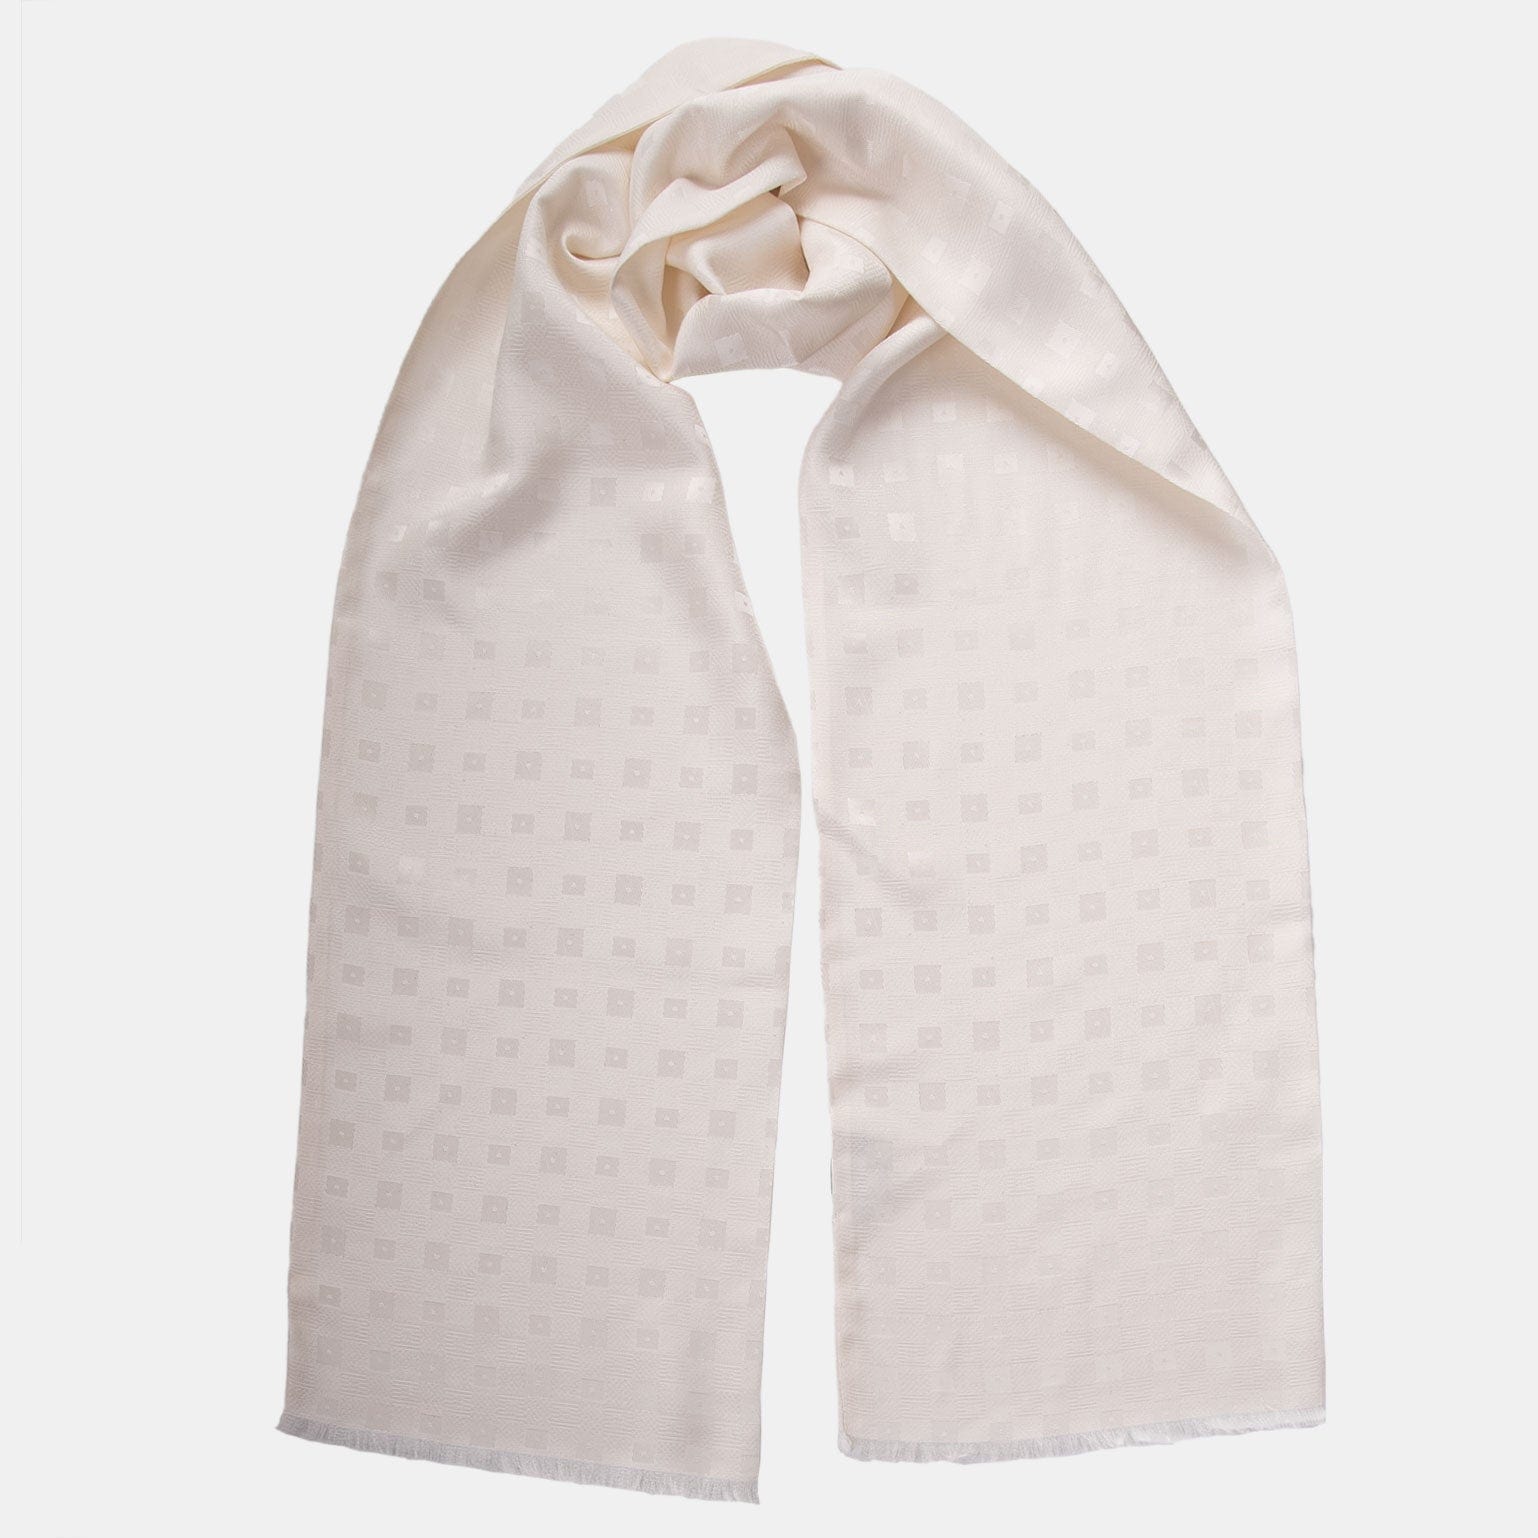 FIVE Ways To Authenticate A REAL Louis Vuitton Scarf - Fashion For Lunch.